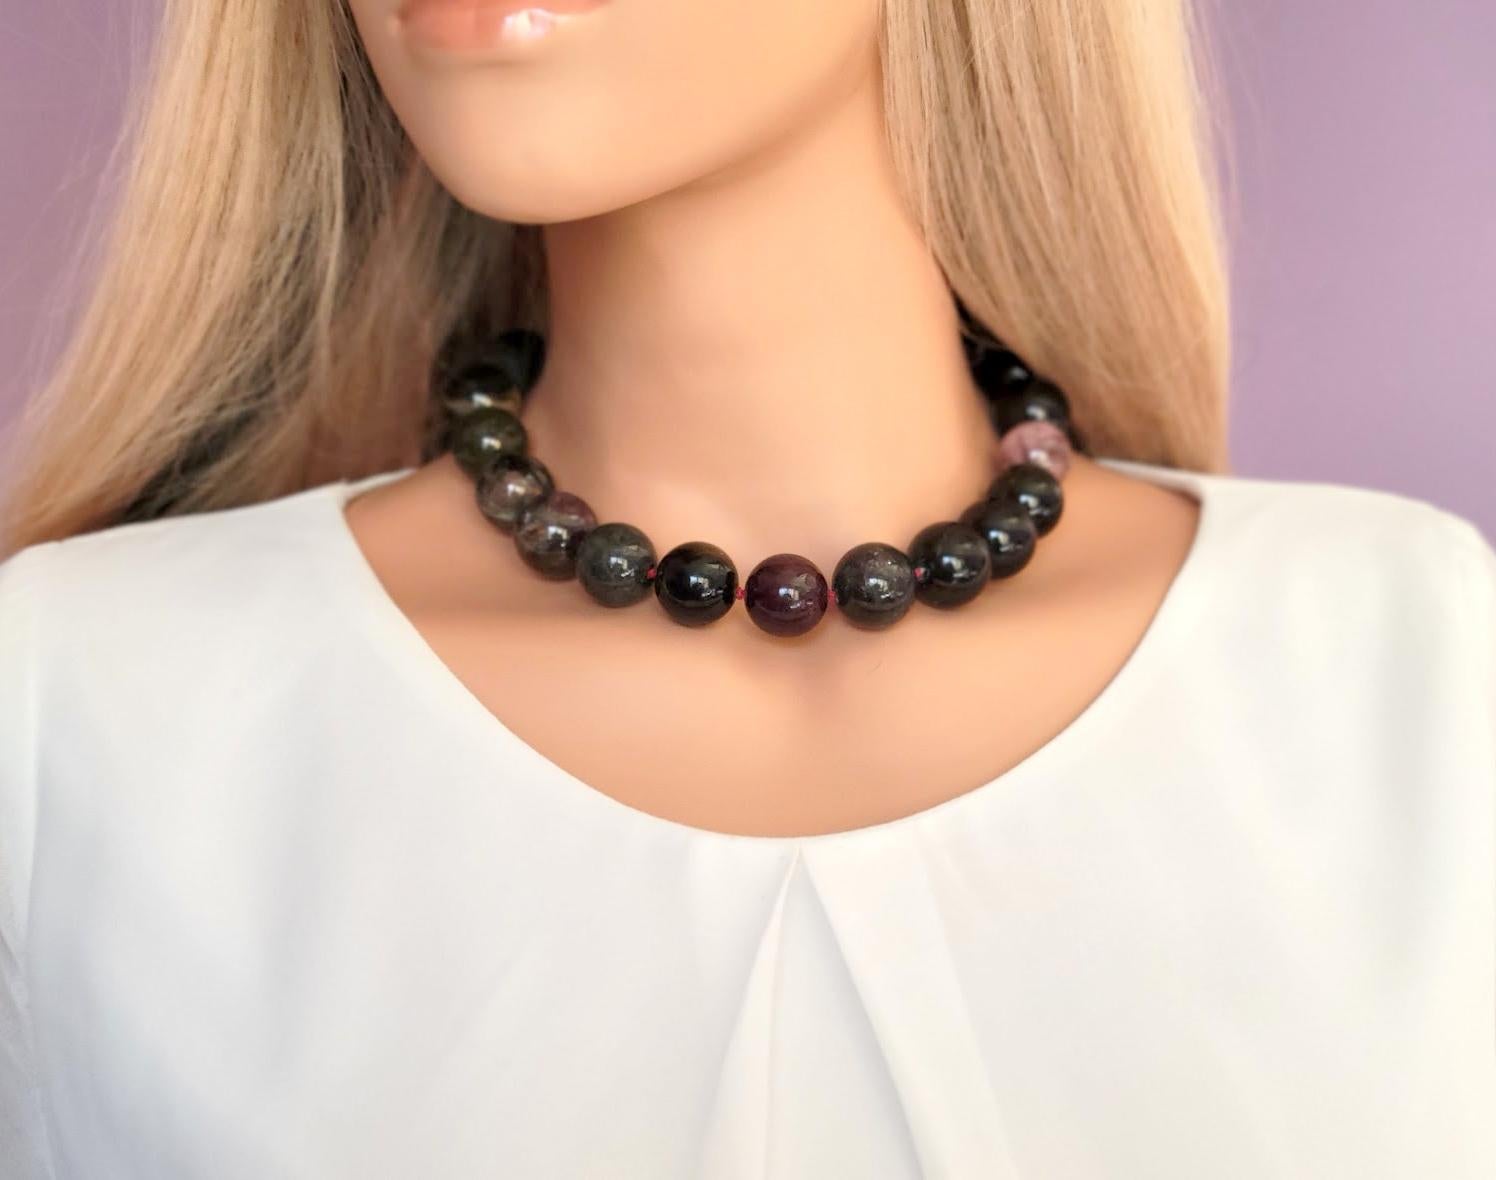 The length of the necklace is 18 inches ( 45.7 cm). The rare huge size of the smooth round beads is 19-20 mm.

Beads are multicolored: black, green, purple, brown, pink, etc. Crystals of tourmaline are green at one end, pink at the other, or green